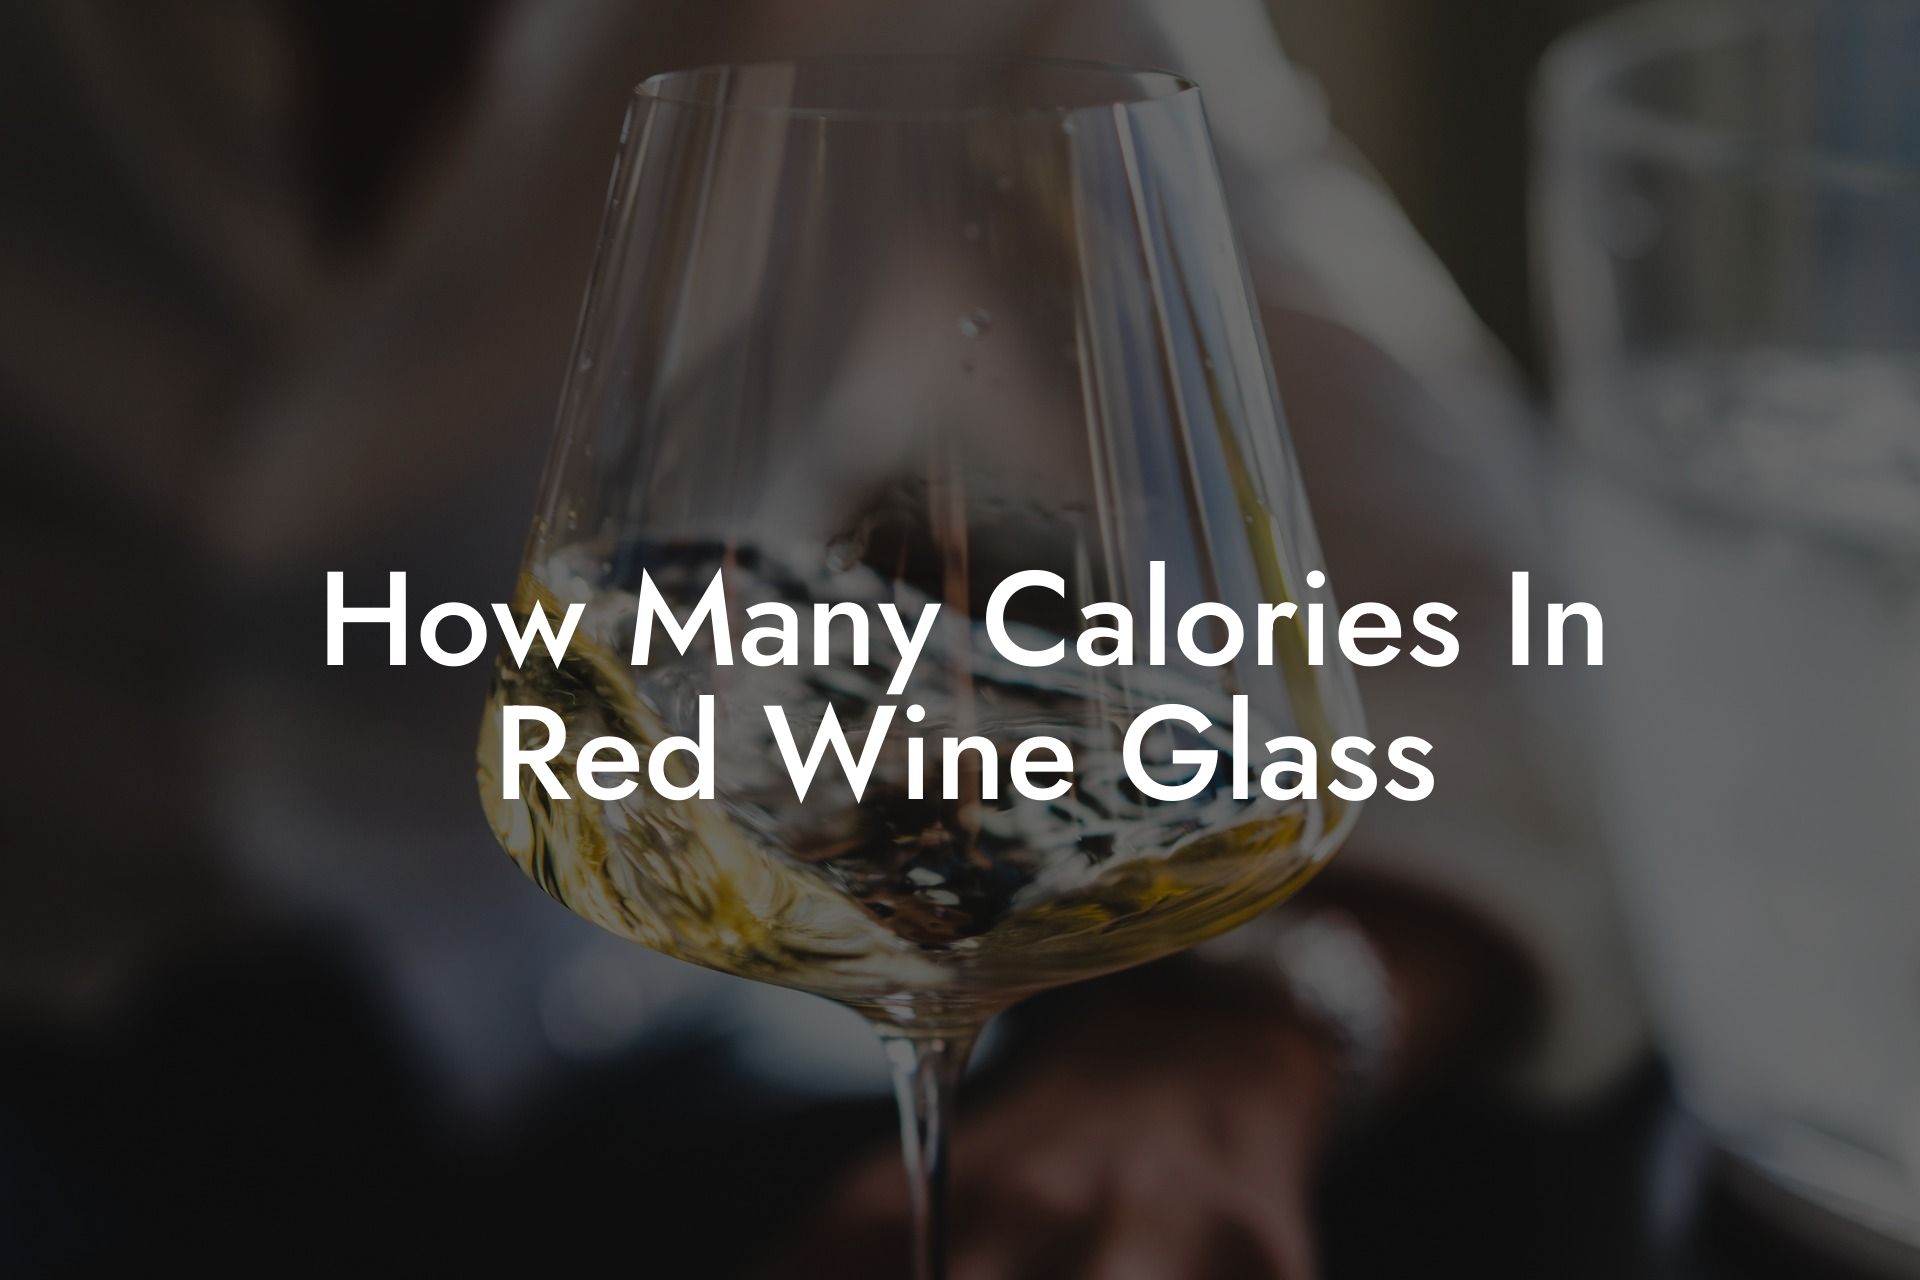 How Many Calories In Red Wine Glass